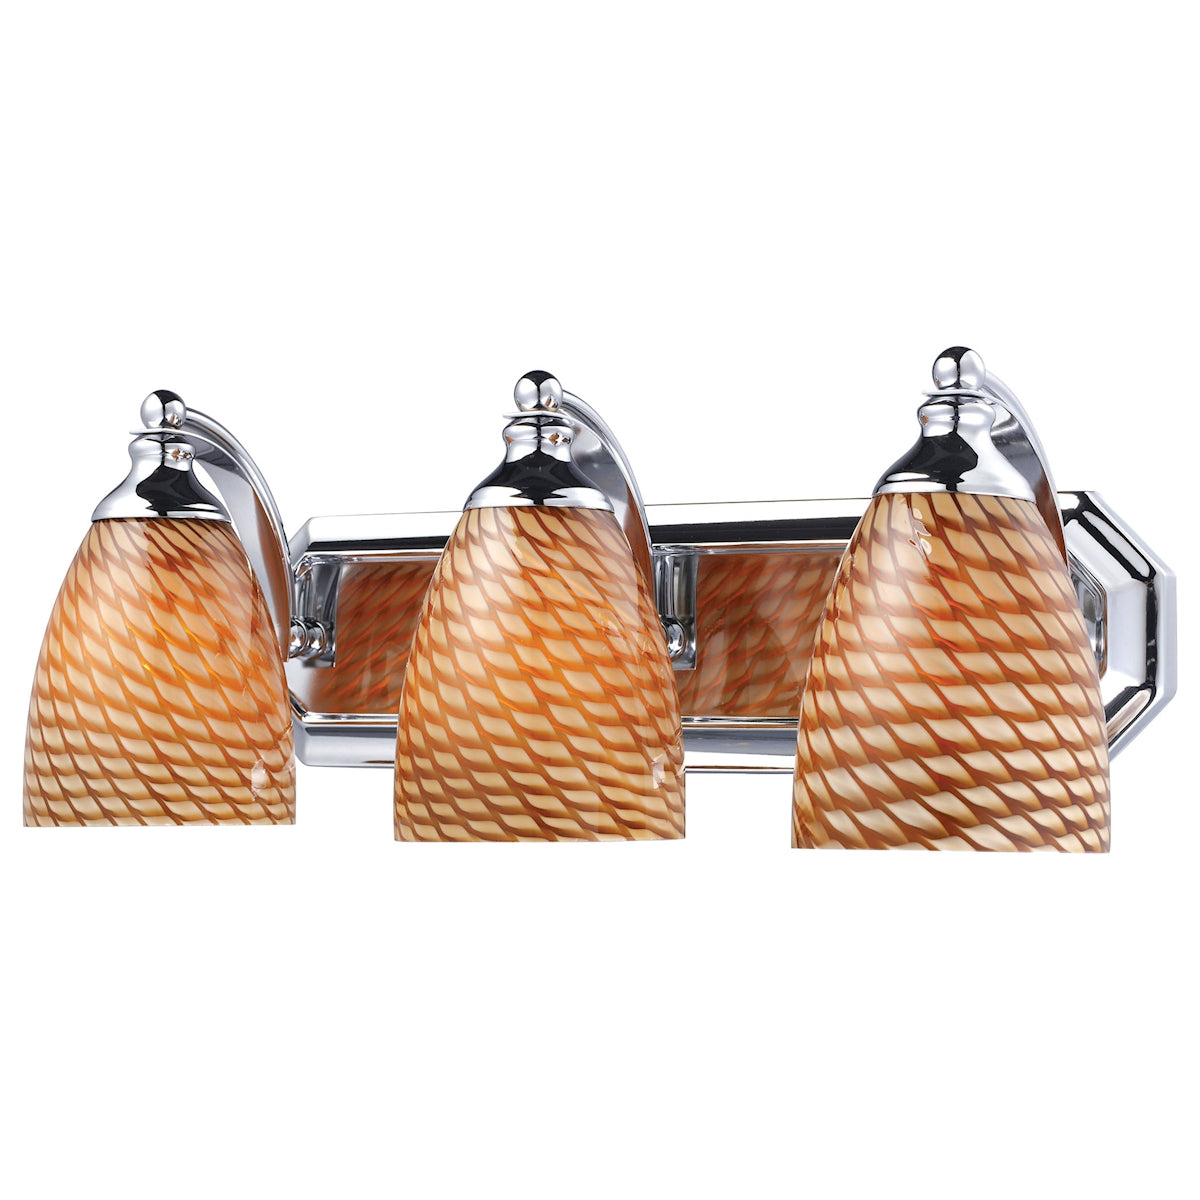 ELK Lighting 570-3C-C Mix and Match Vanity 3-Light Wall Lamp in Chrome with Cocoa Glass